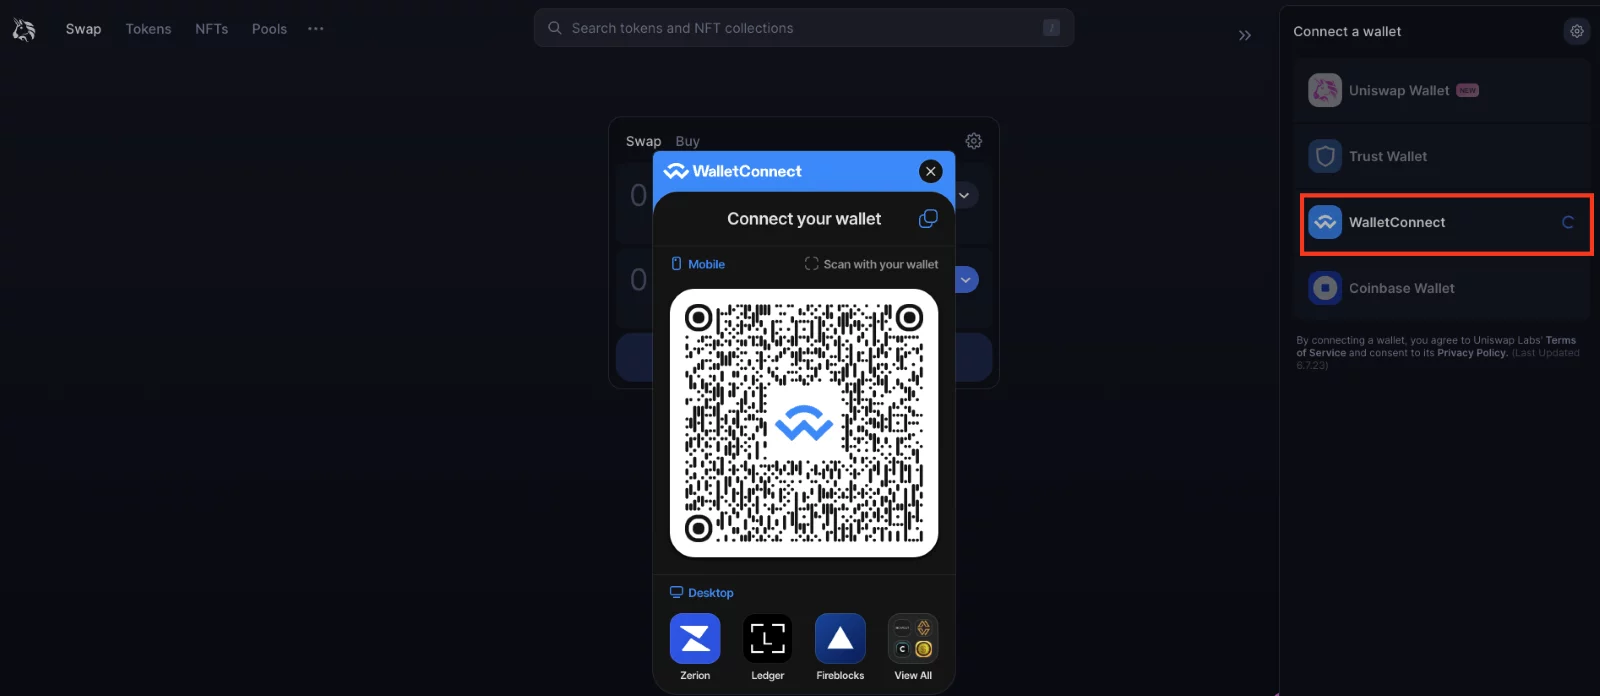 Step 2. Connect on the Platform with WalletConnect 